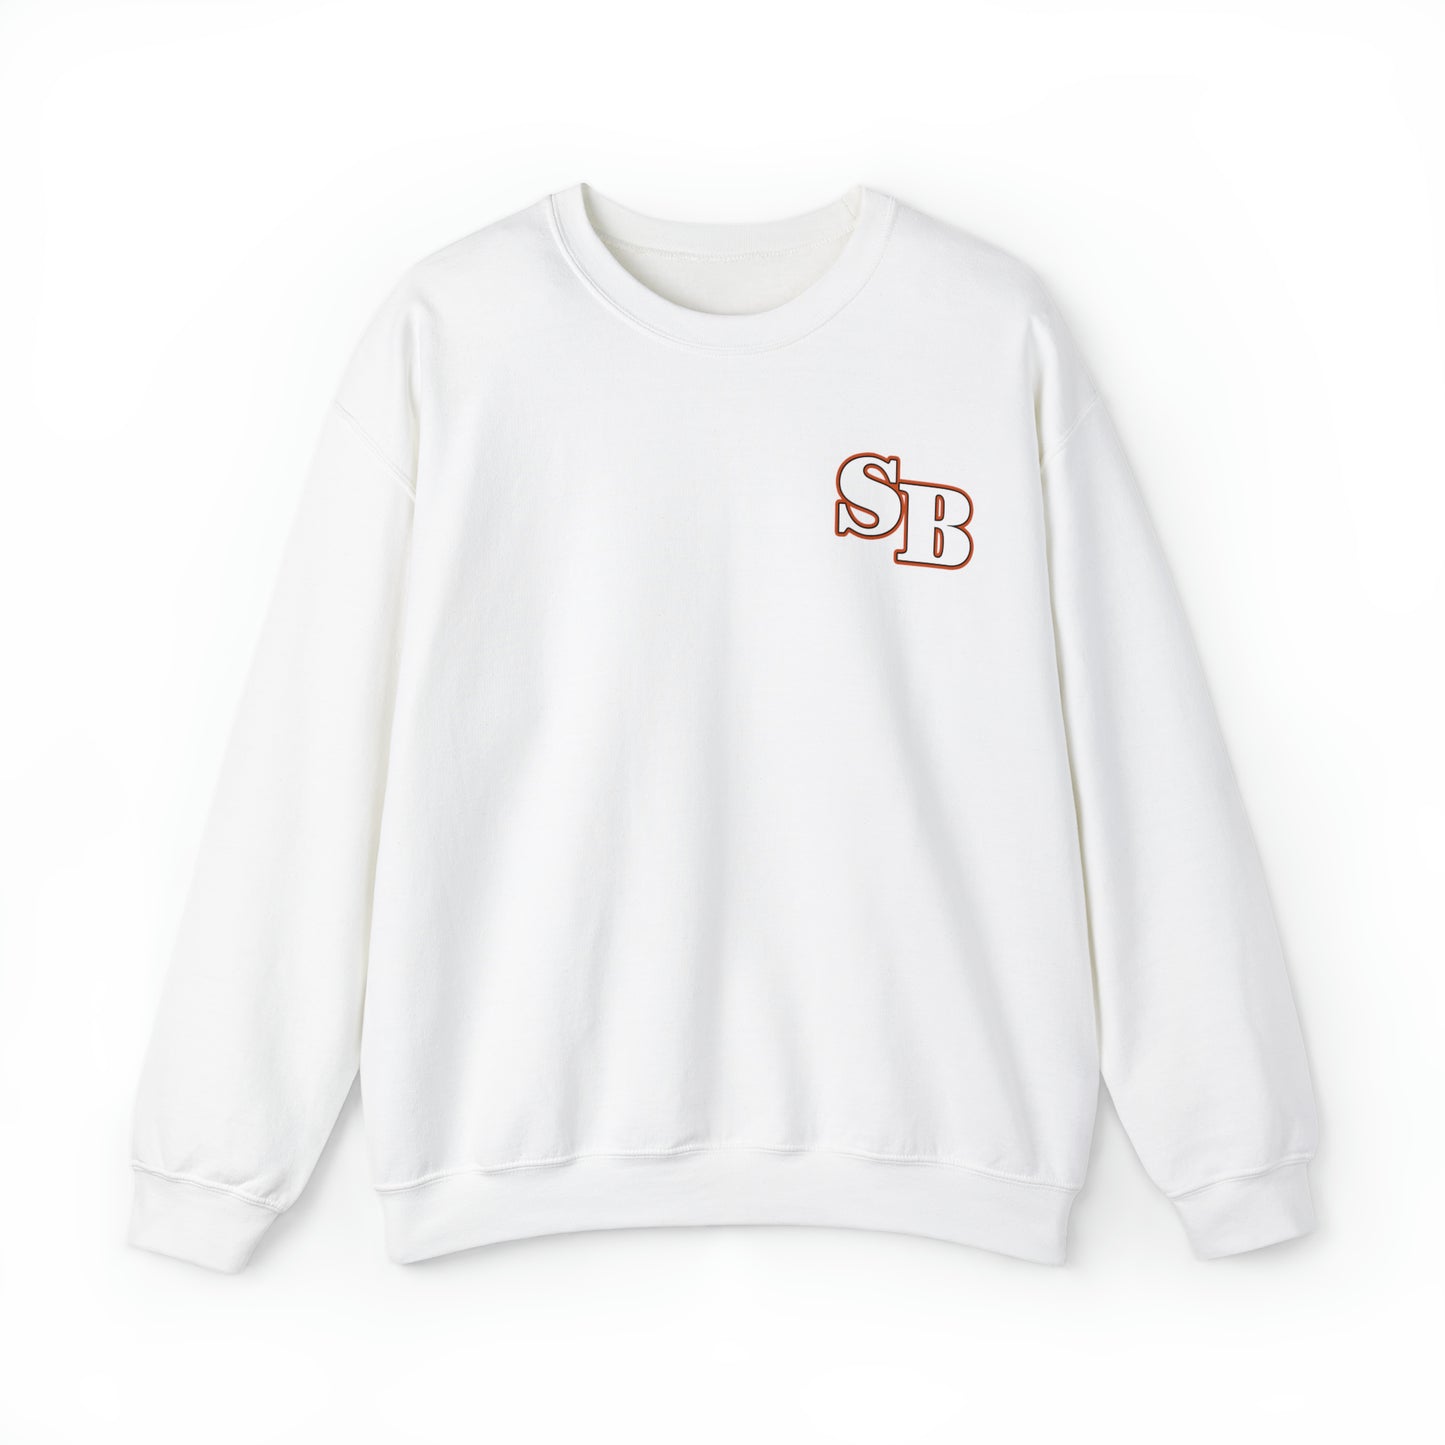 Shylien Brister: One Of One Crewneck